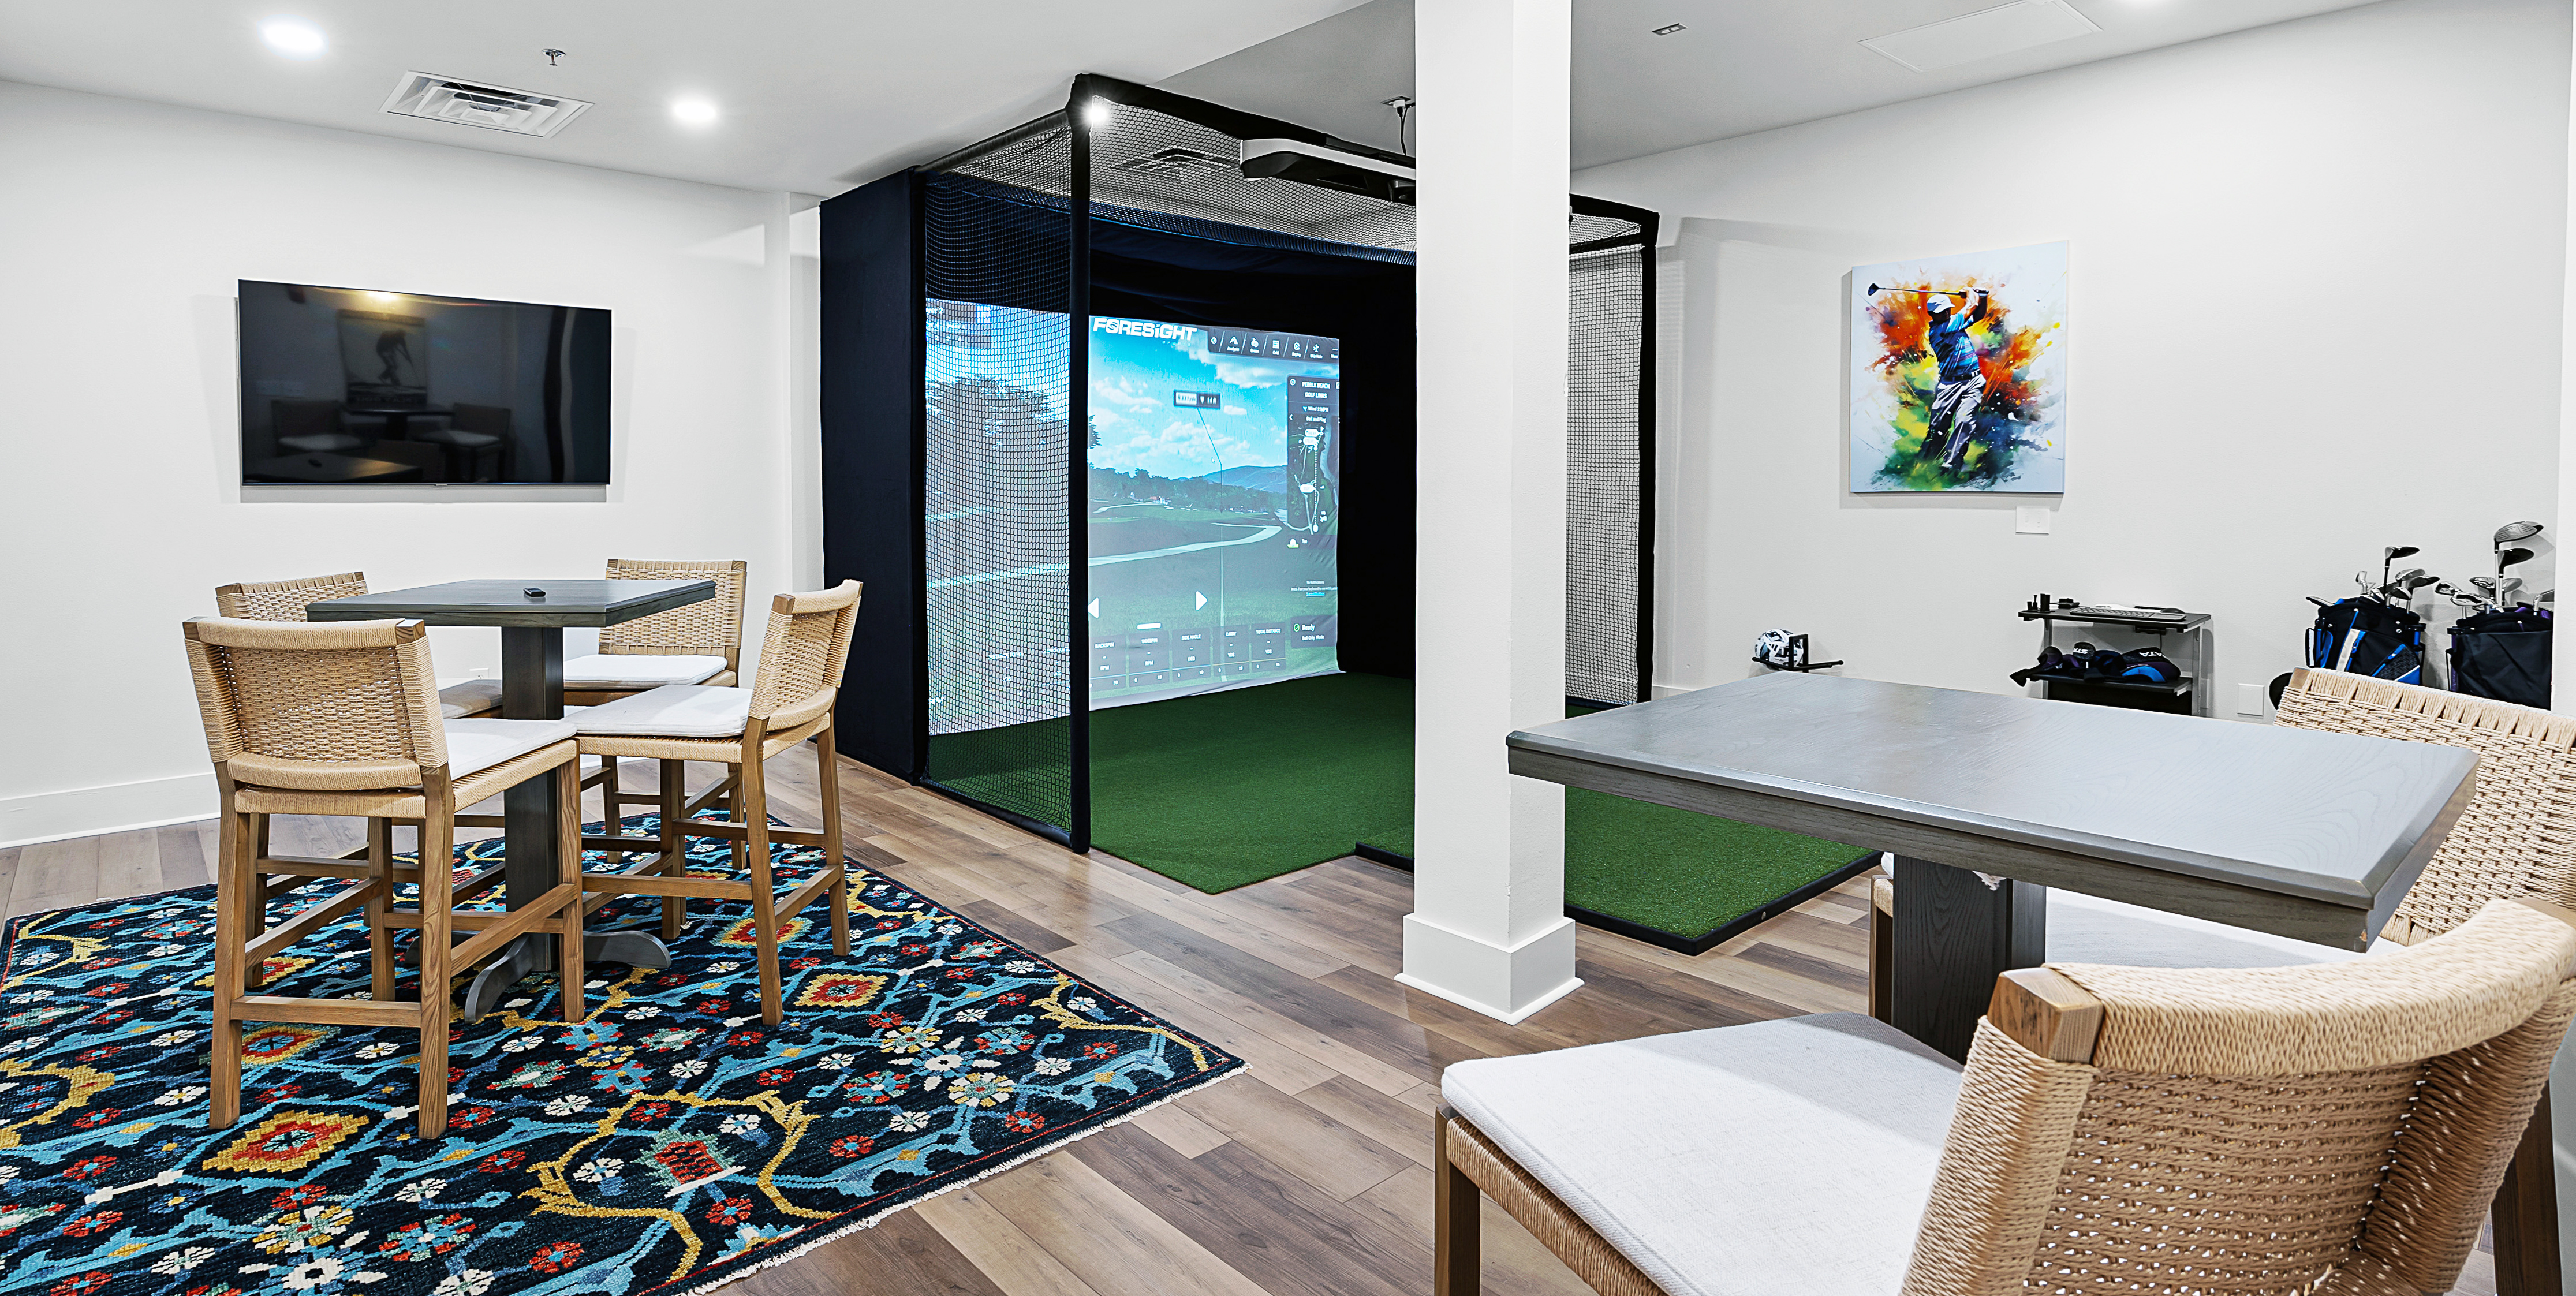 The Preserve at Pickwick Lake's Clubhouse Features a State-of-the-Art Golf Simulator with Stunning Reproductions of the World's Best Courses and Brush Up on Your Putting Skills on the New 1,750 sf 9-Hole Precision Putting Green